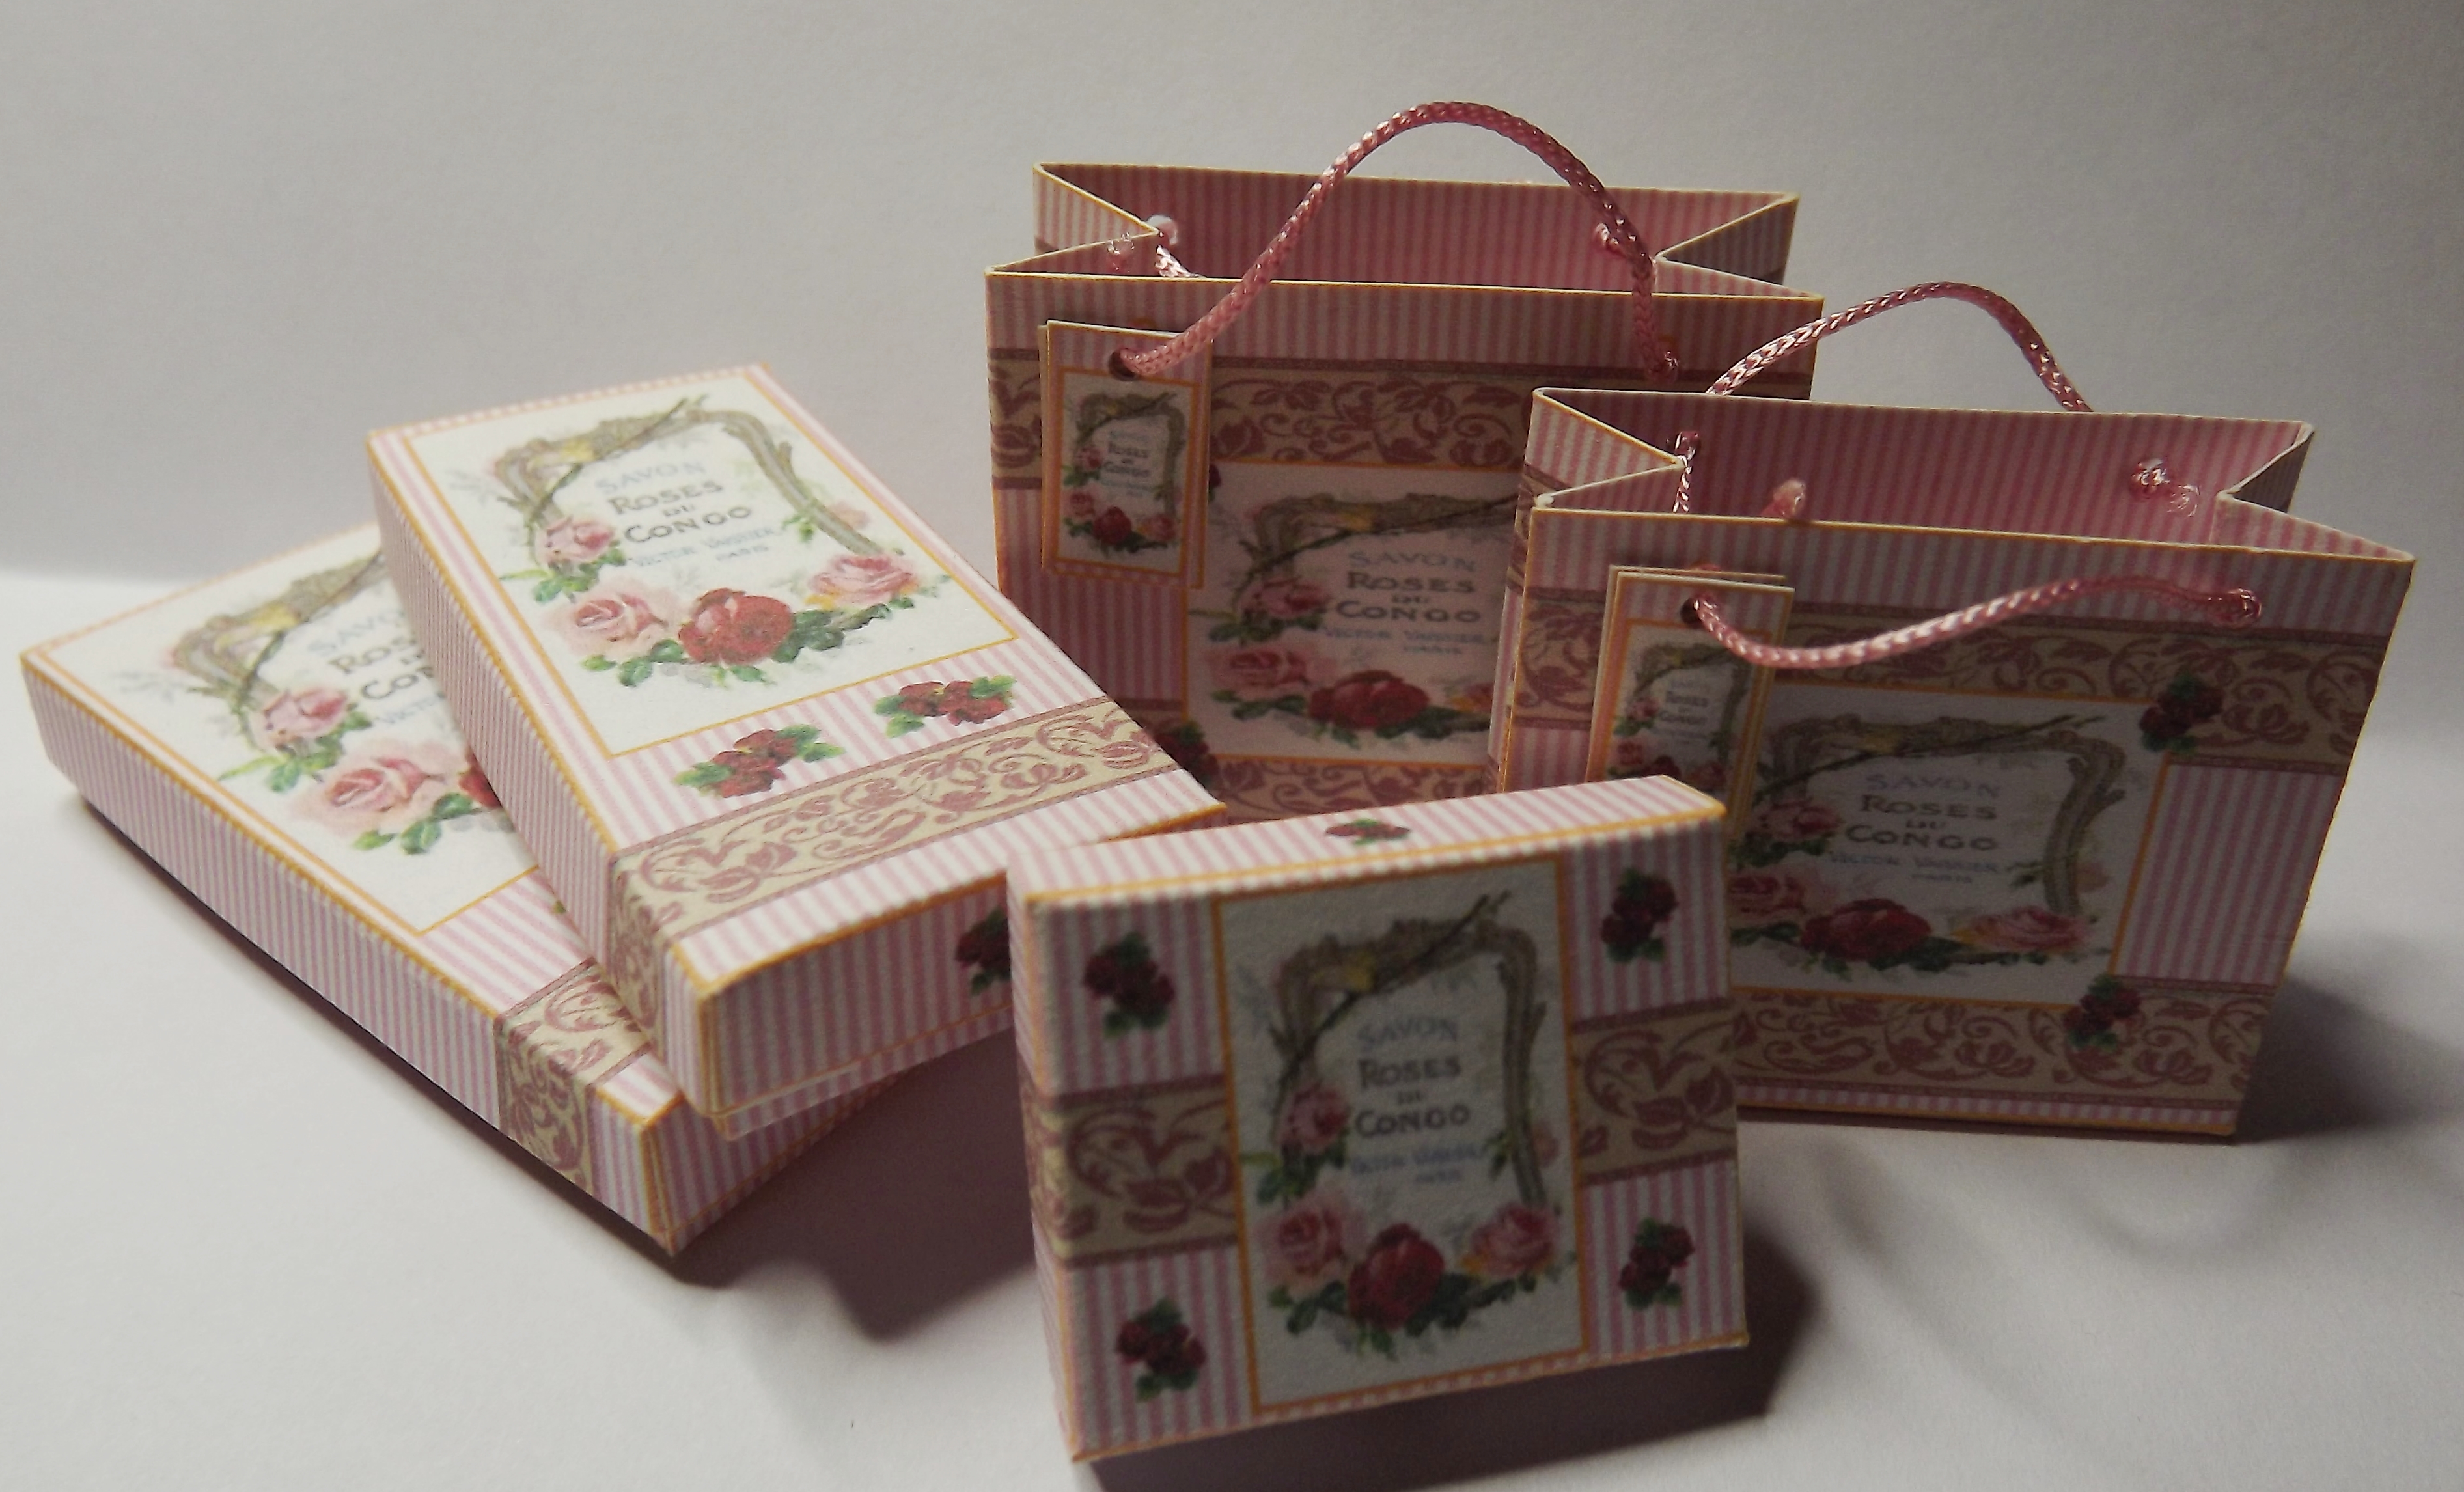 ROSES DE CONGO BAGS AND BOXES KIT